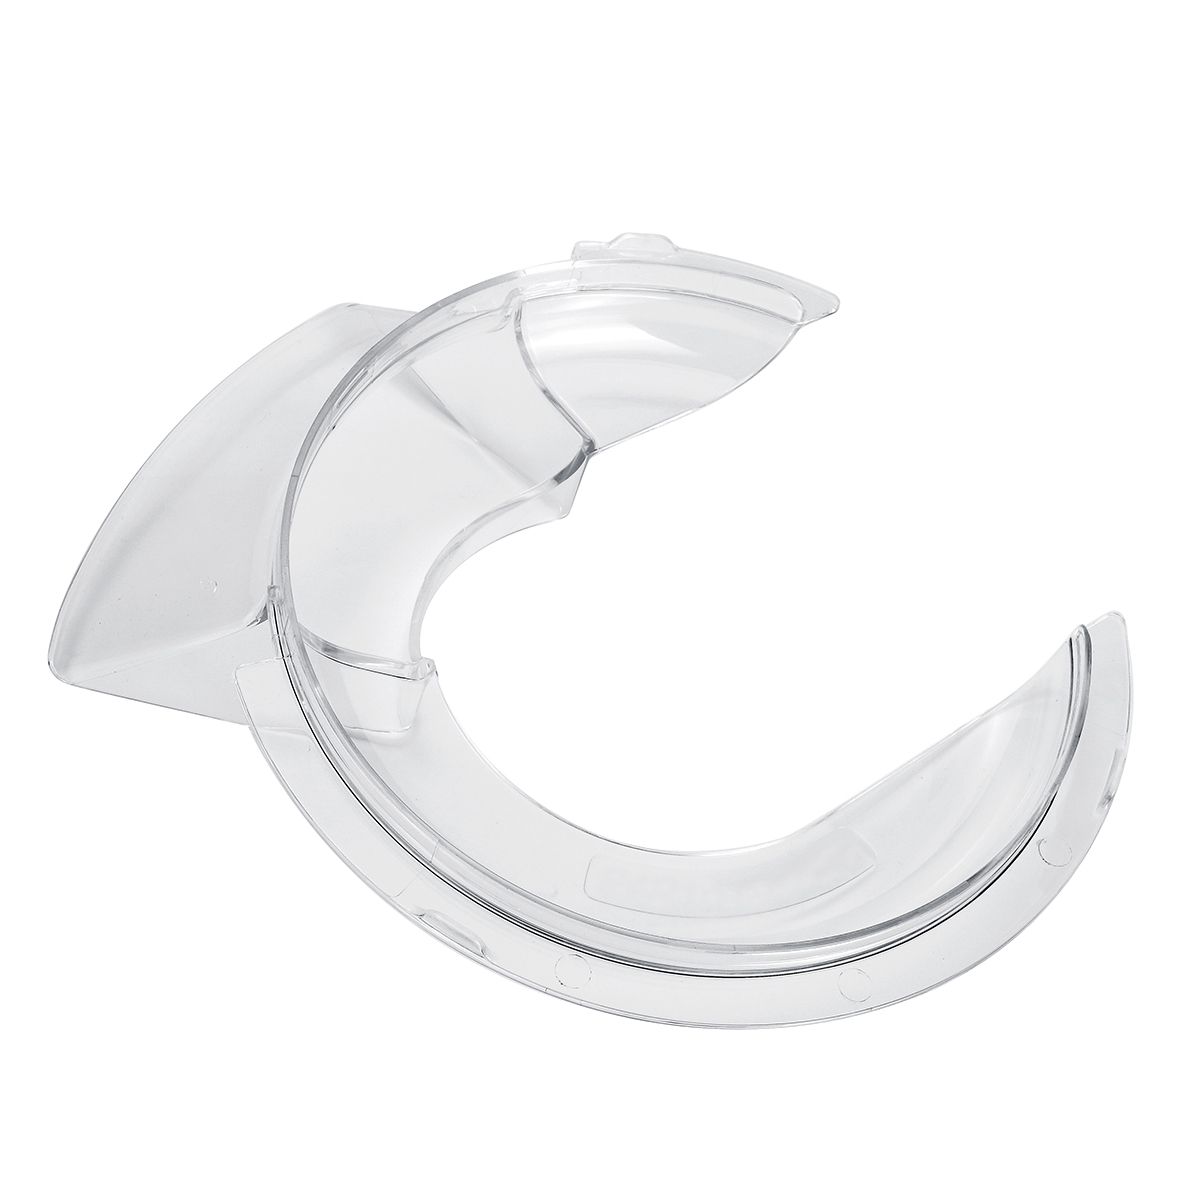 45-5QT-ABS-Bowl-Pouring-Shield-Tilt-Head-for-KitchenAid-Stand-Mixer-Replacement-Accessories-1636695